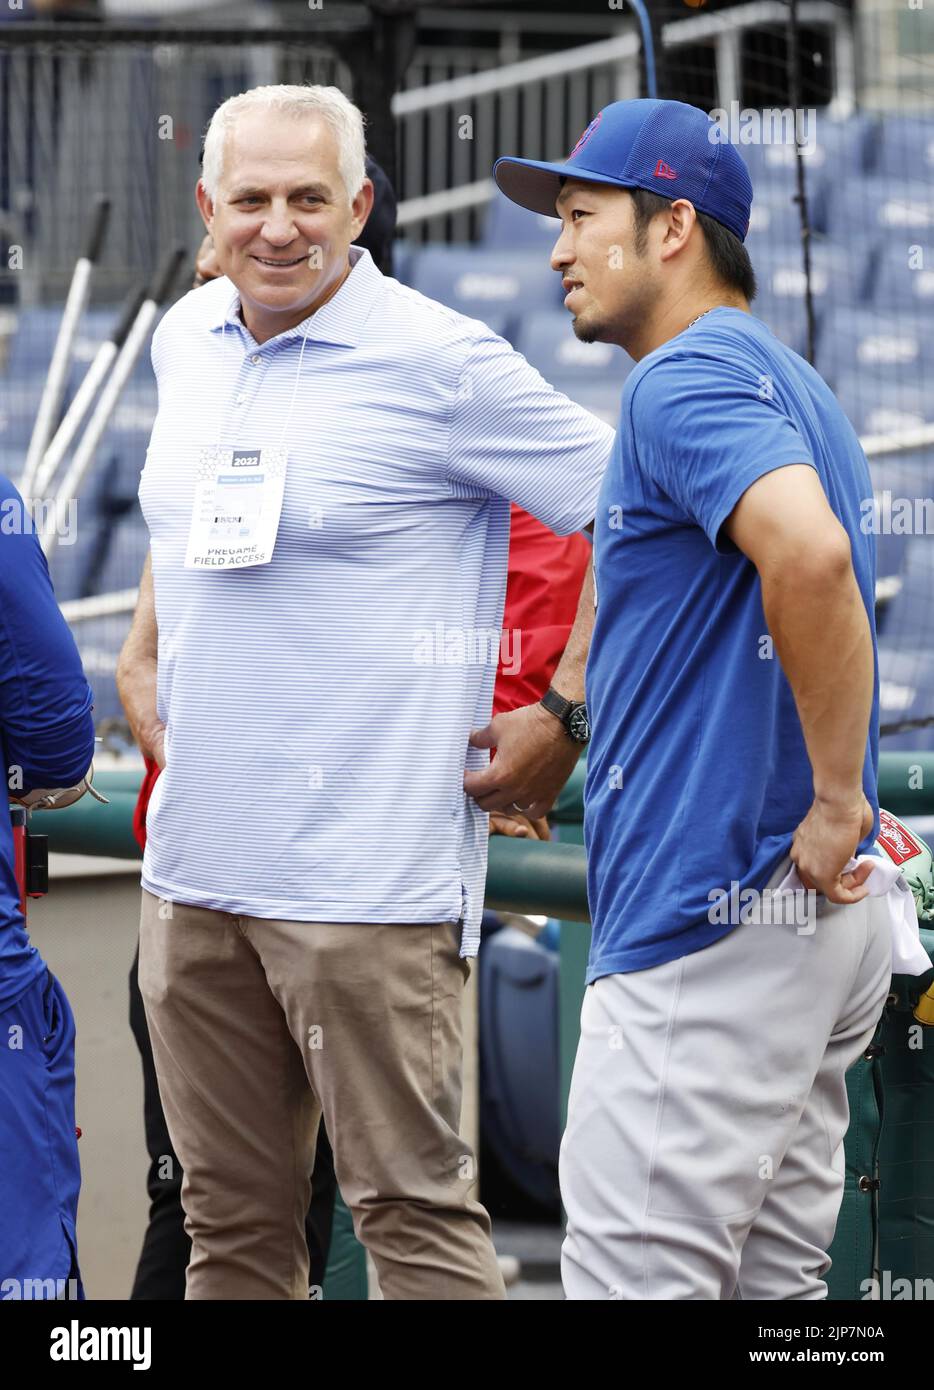 Chicago Cubs outfielder Seiya Suzuki (R) talks with his agent Joel Wolfe prior to a baseball game against the Washington Nationals on Aug. 15, 2022, at Nationals Park in Washington. (Kyodo)==Kyodo Photo via Credit: Newscom/Alamy Live News Stock Photo